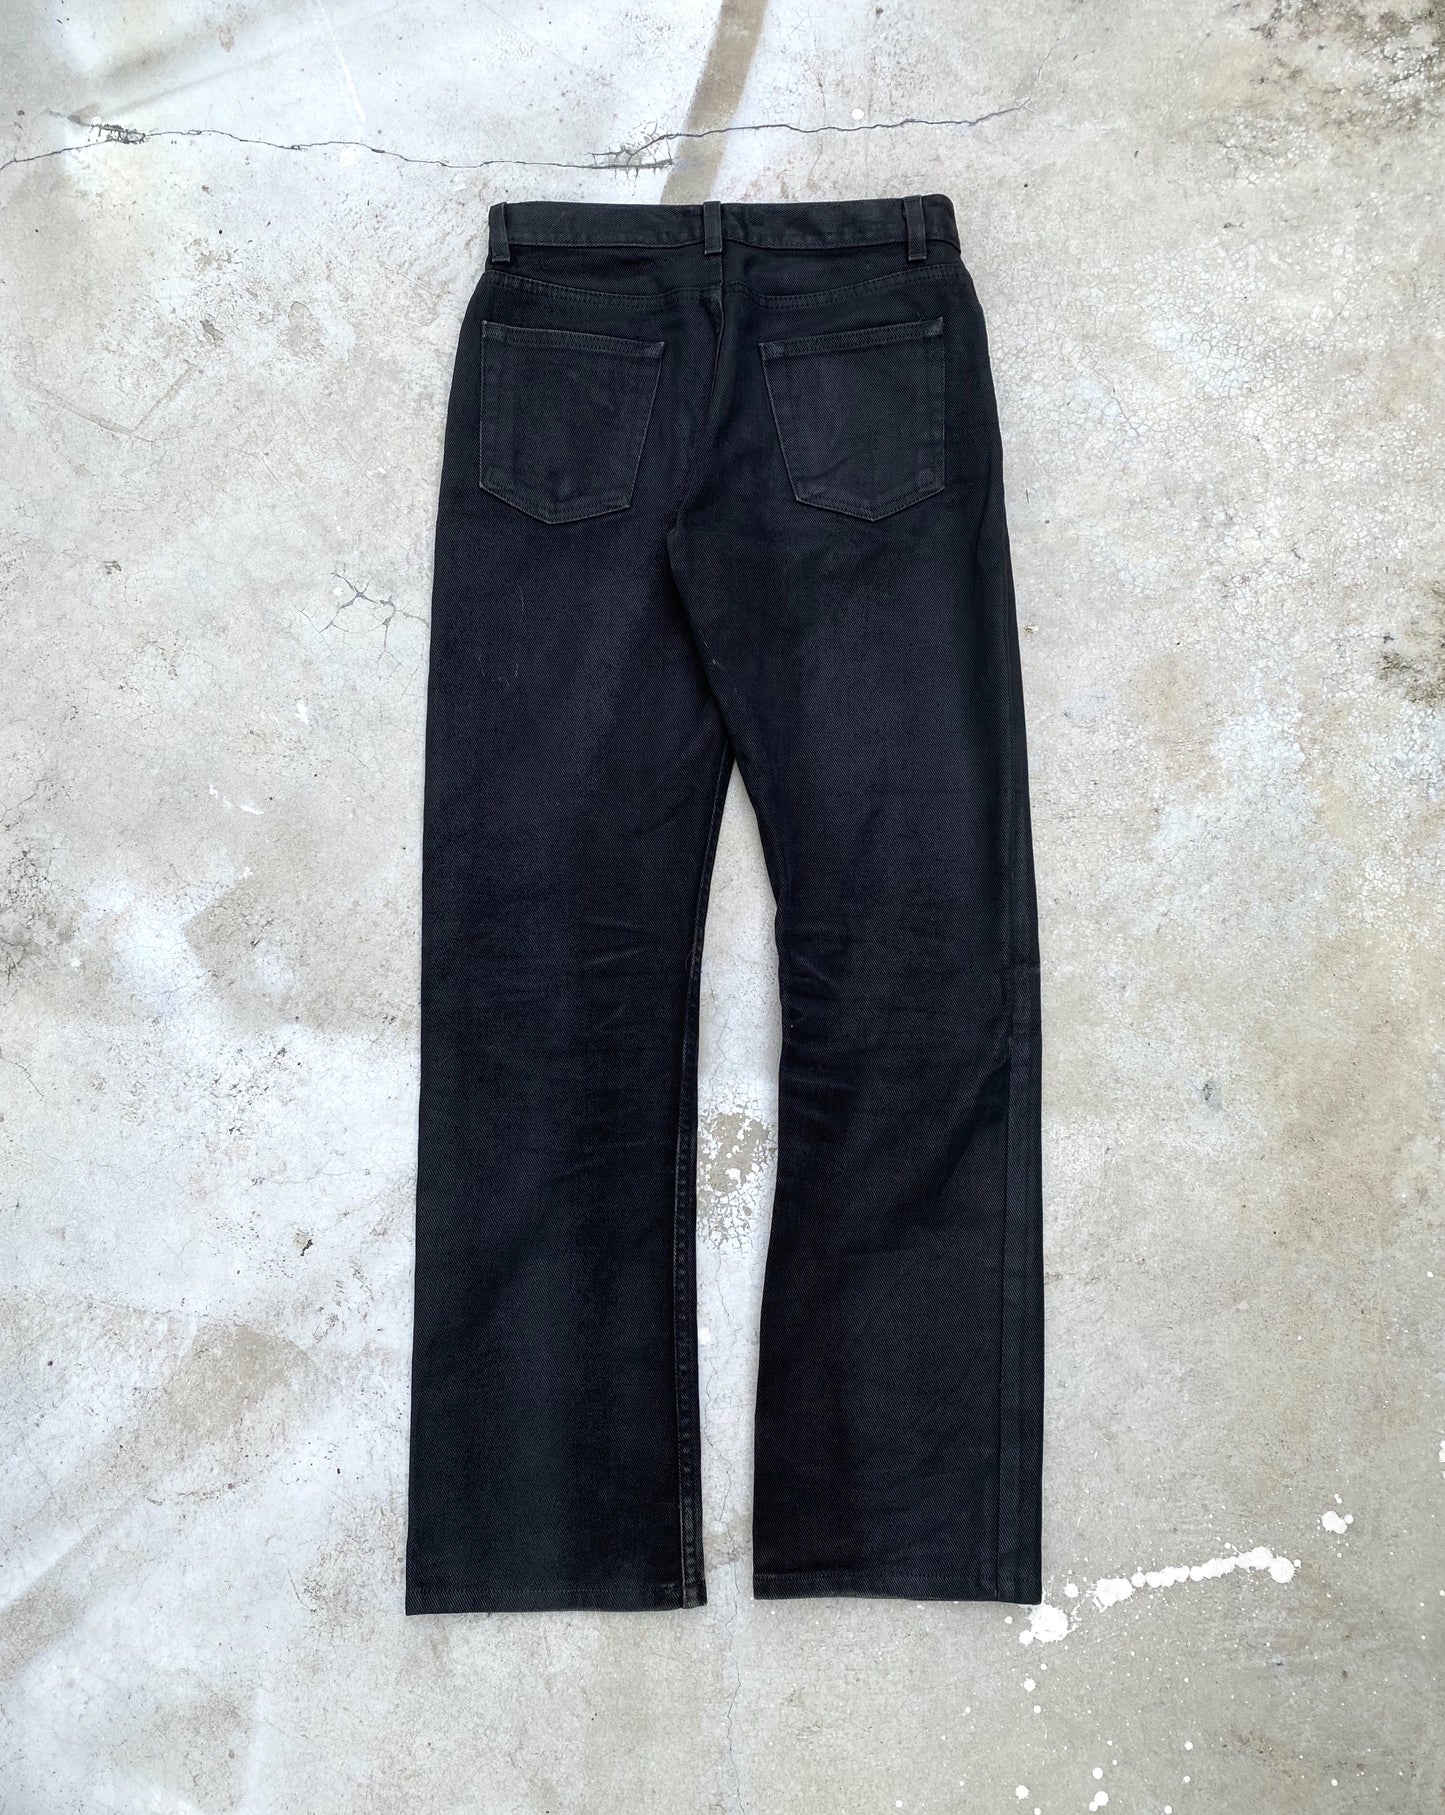 1999 Helmut Lang Waxed Jeans